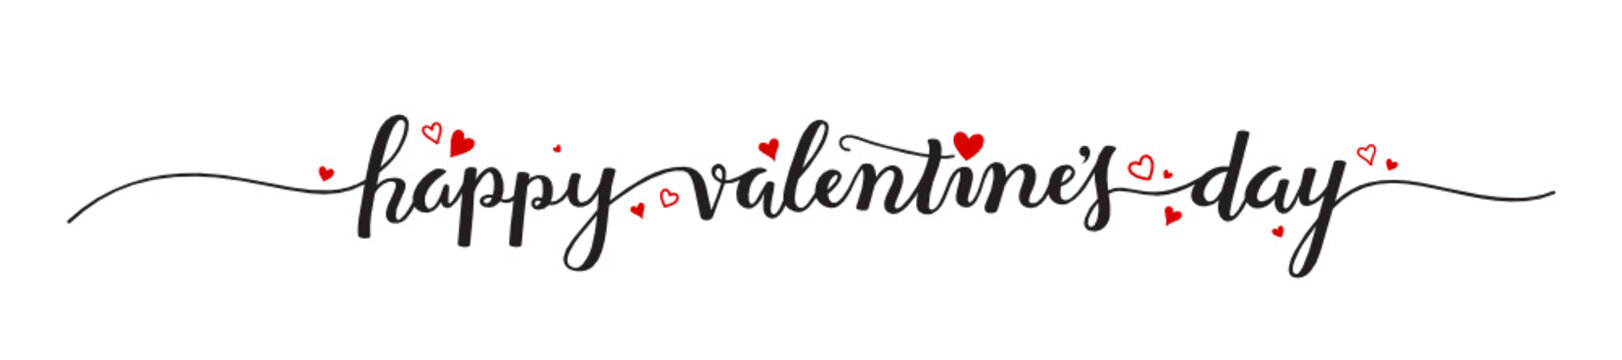 HAPPY VALENTINE’S DAY hand lettering banner with hearts